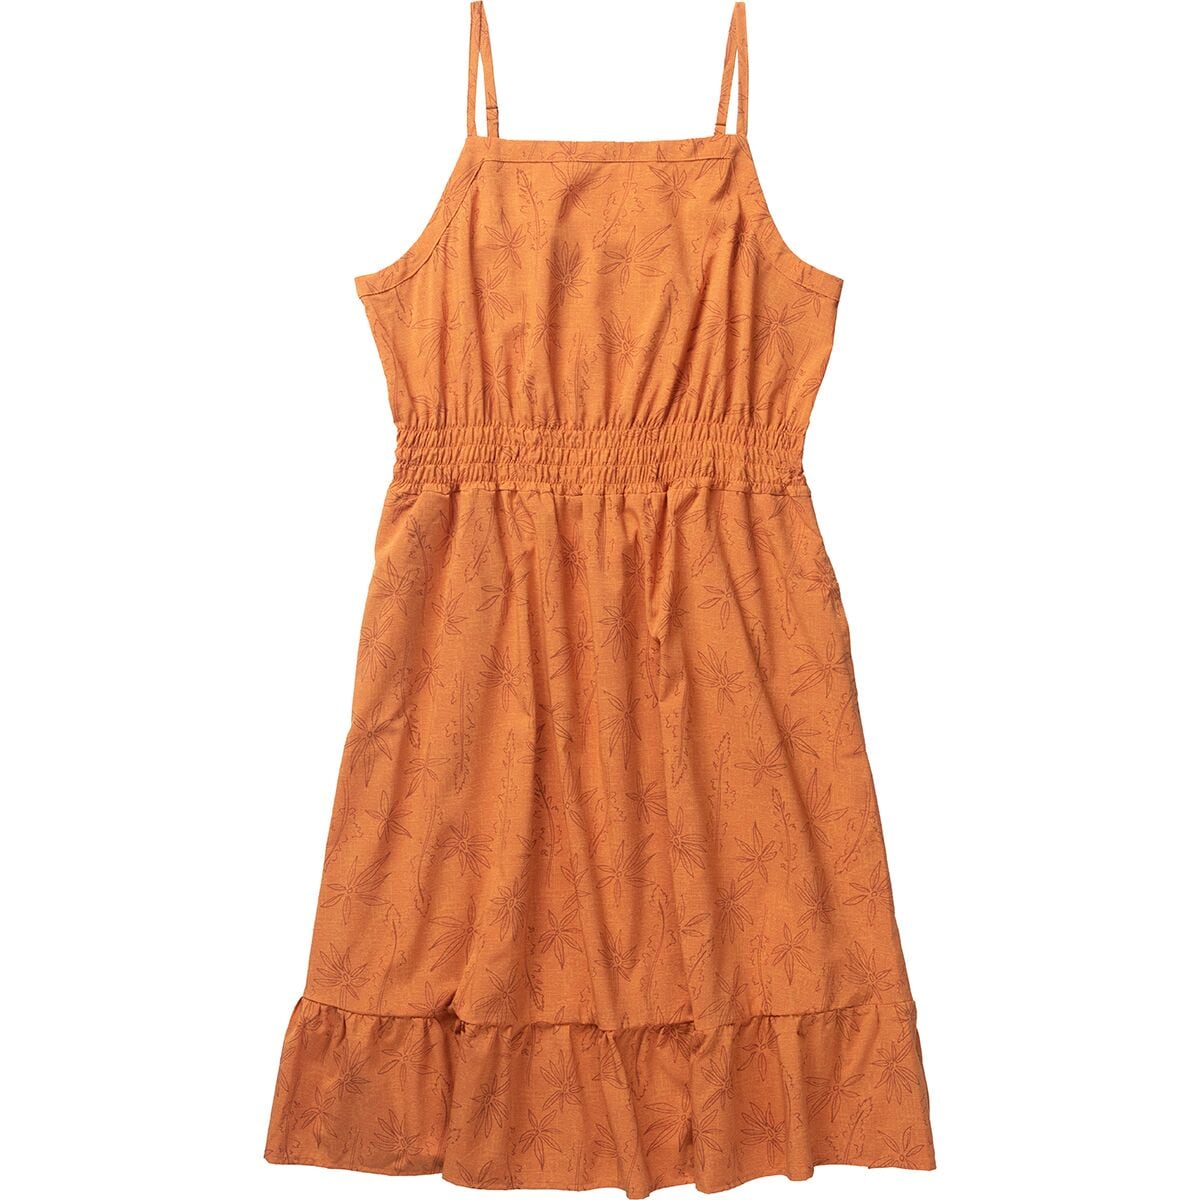 Toad&Co Sunkissed Bella Dress - Women's